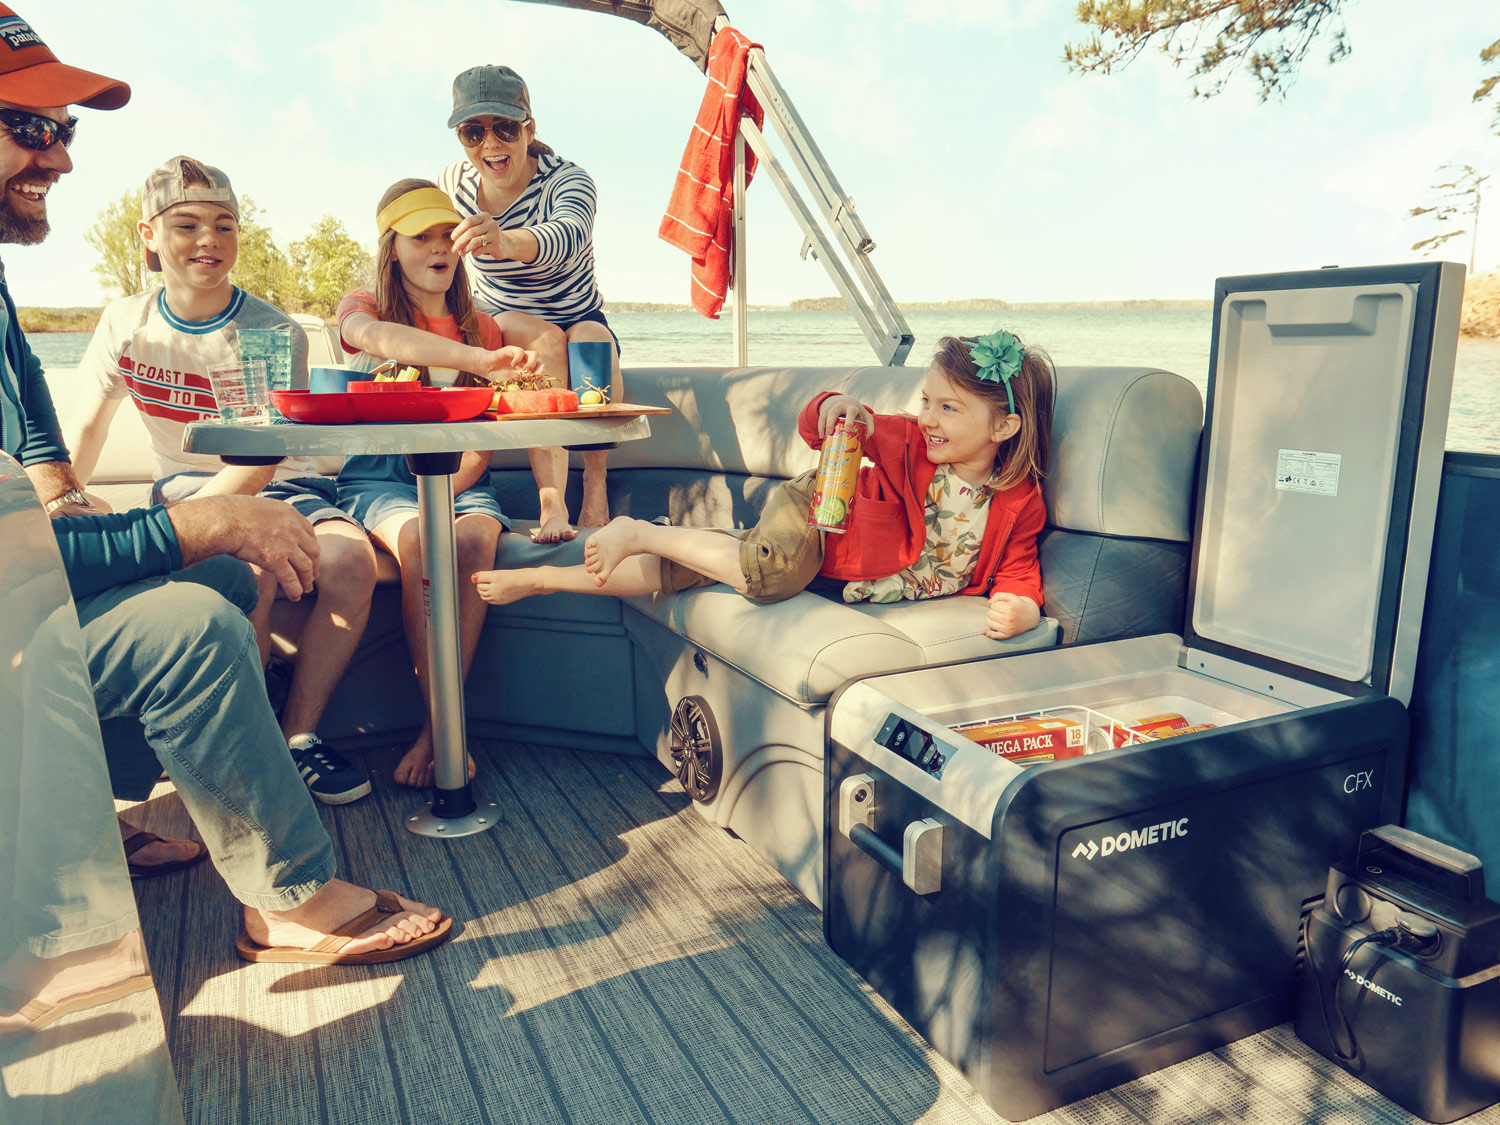 The Dometic CFX3 - A New Portable Cooler With A World-First